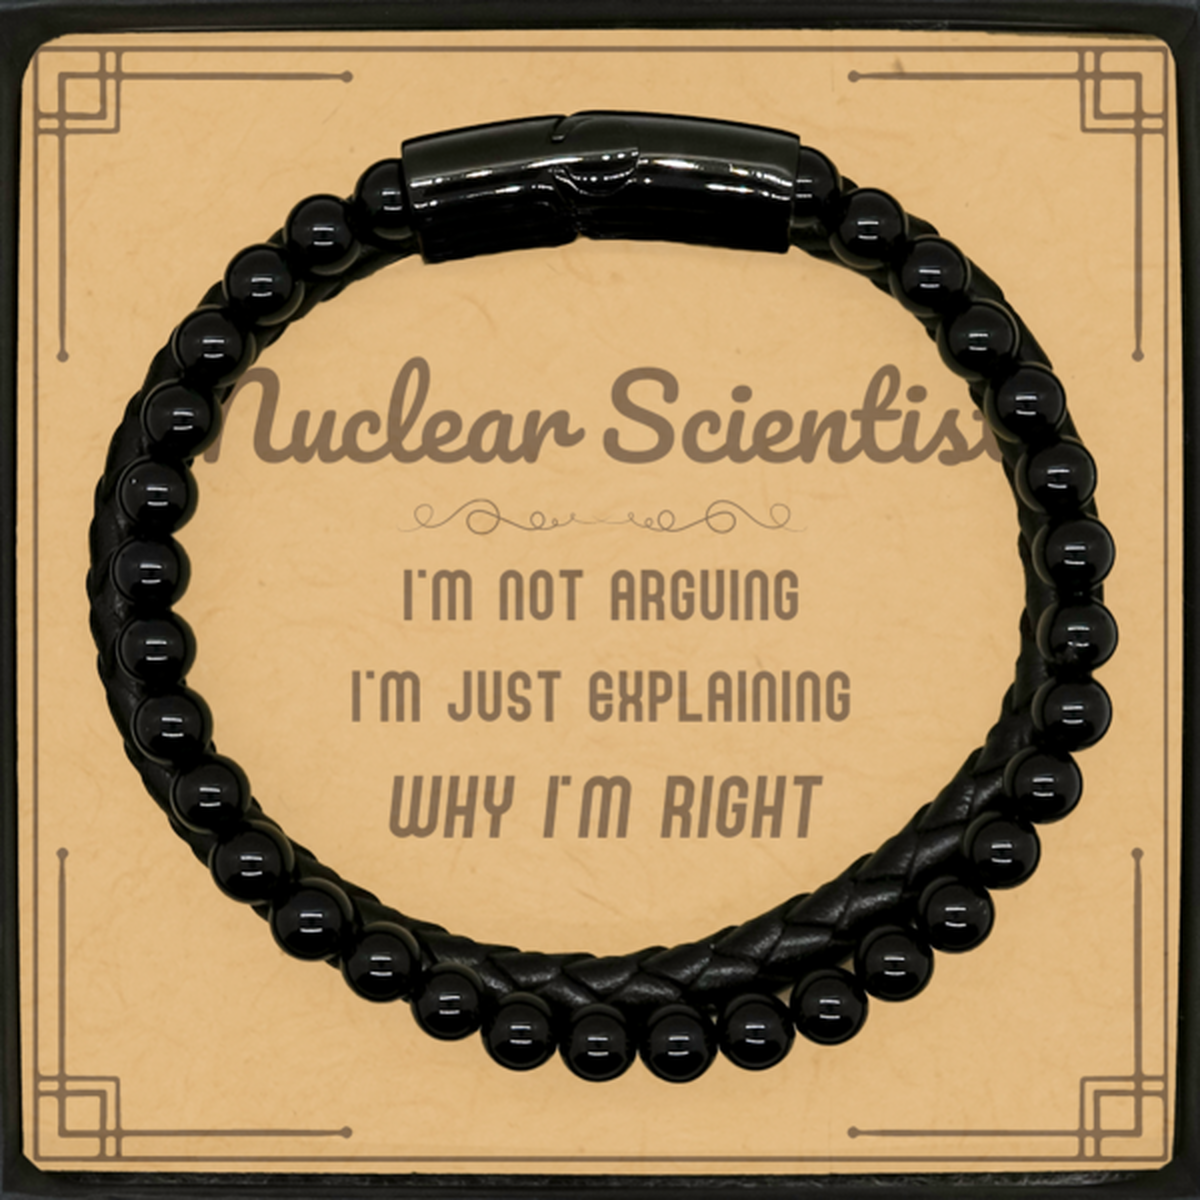 Nuclear Scientist I'm not Arguing. I'm Just Explaining Why I'm RIGHT Stone Leather Bracelets, Funny Saying Quote Nuclear Scientist Gifts For Nuclear Scientist Message Card Graduation Birthday Christmas Gifts for Men Women Coworker